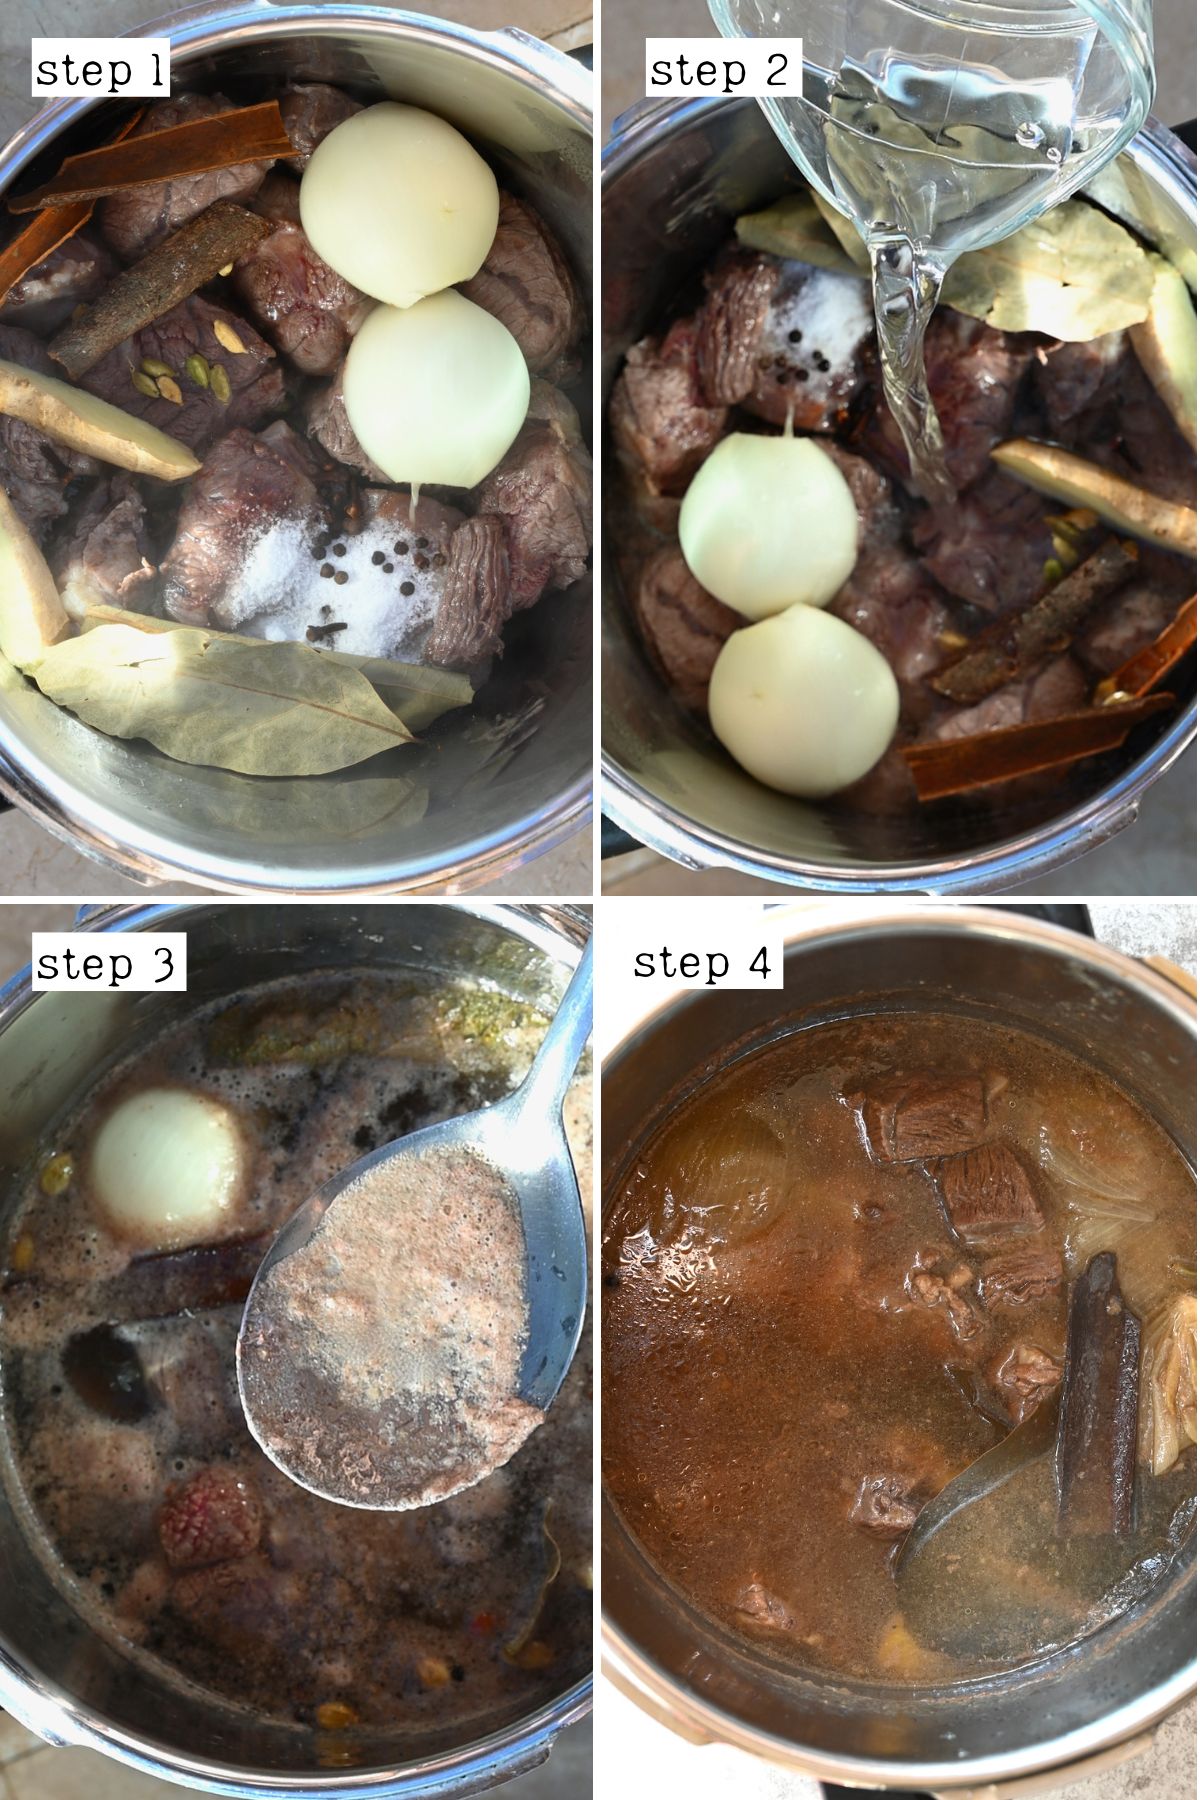 Steps for making beef broth